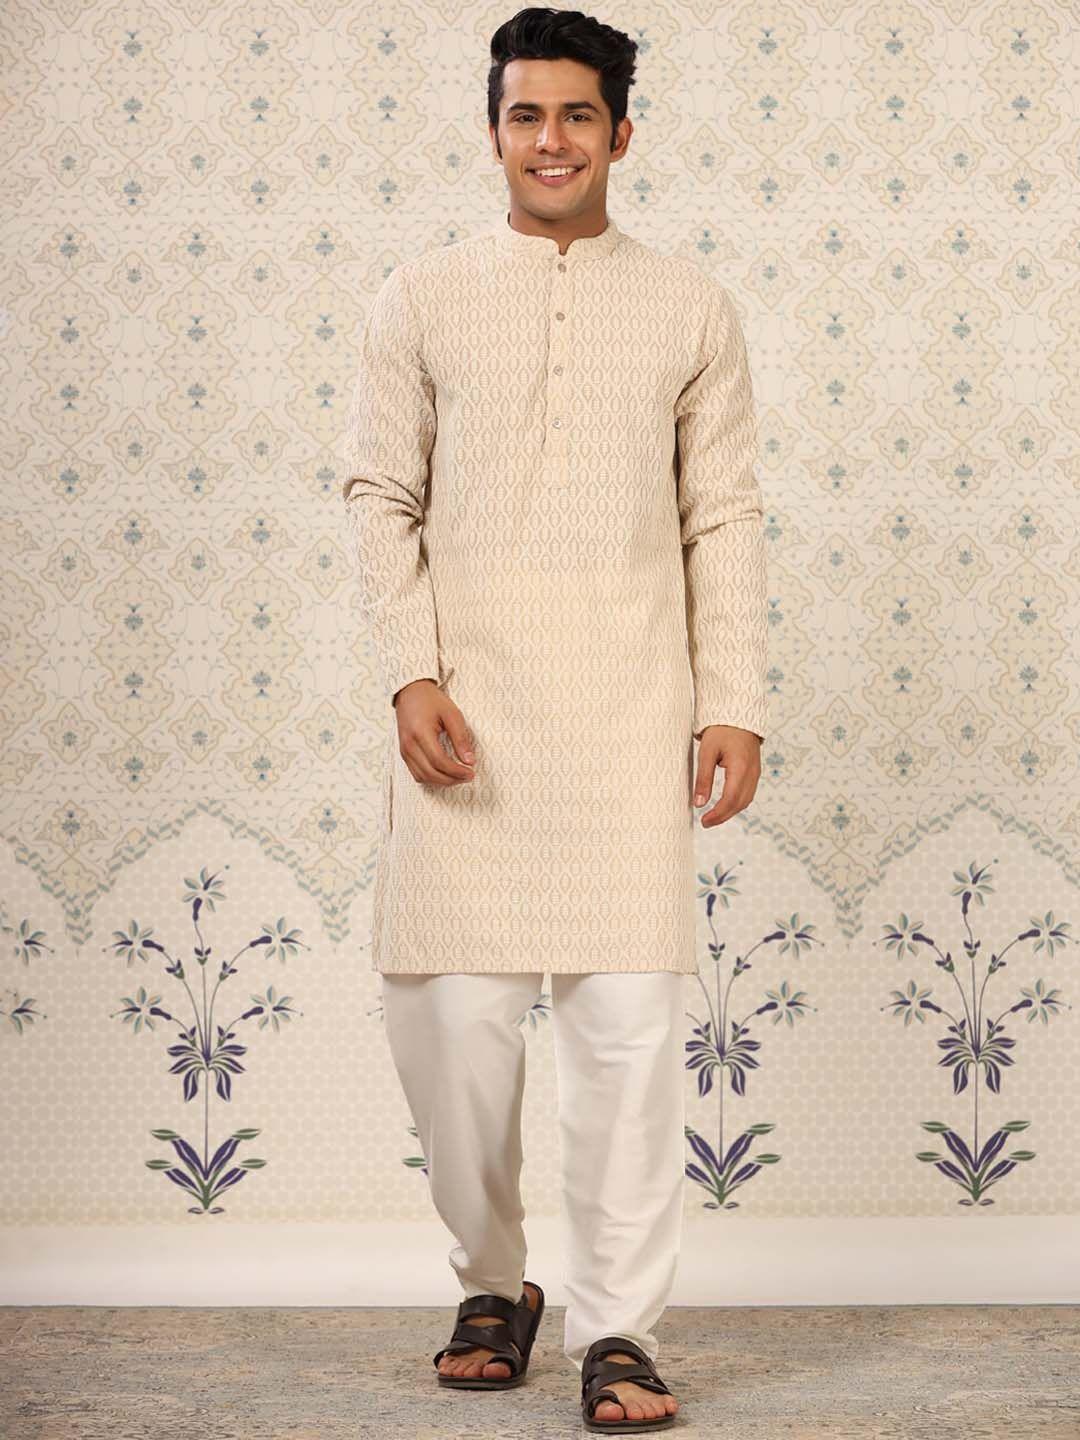 Ode by House of Pataudi Ethnic Motifs Embroidered Kurta